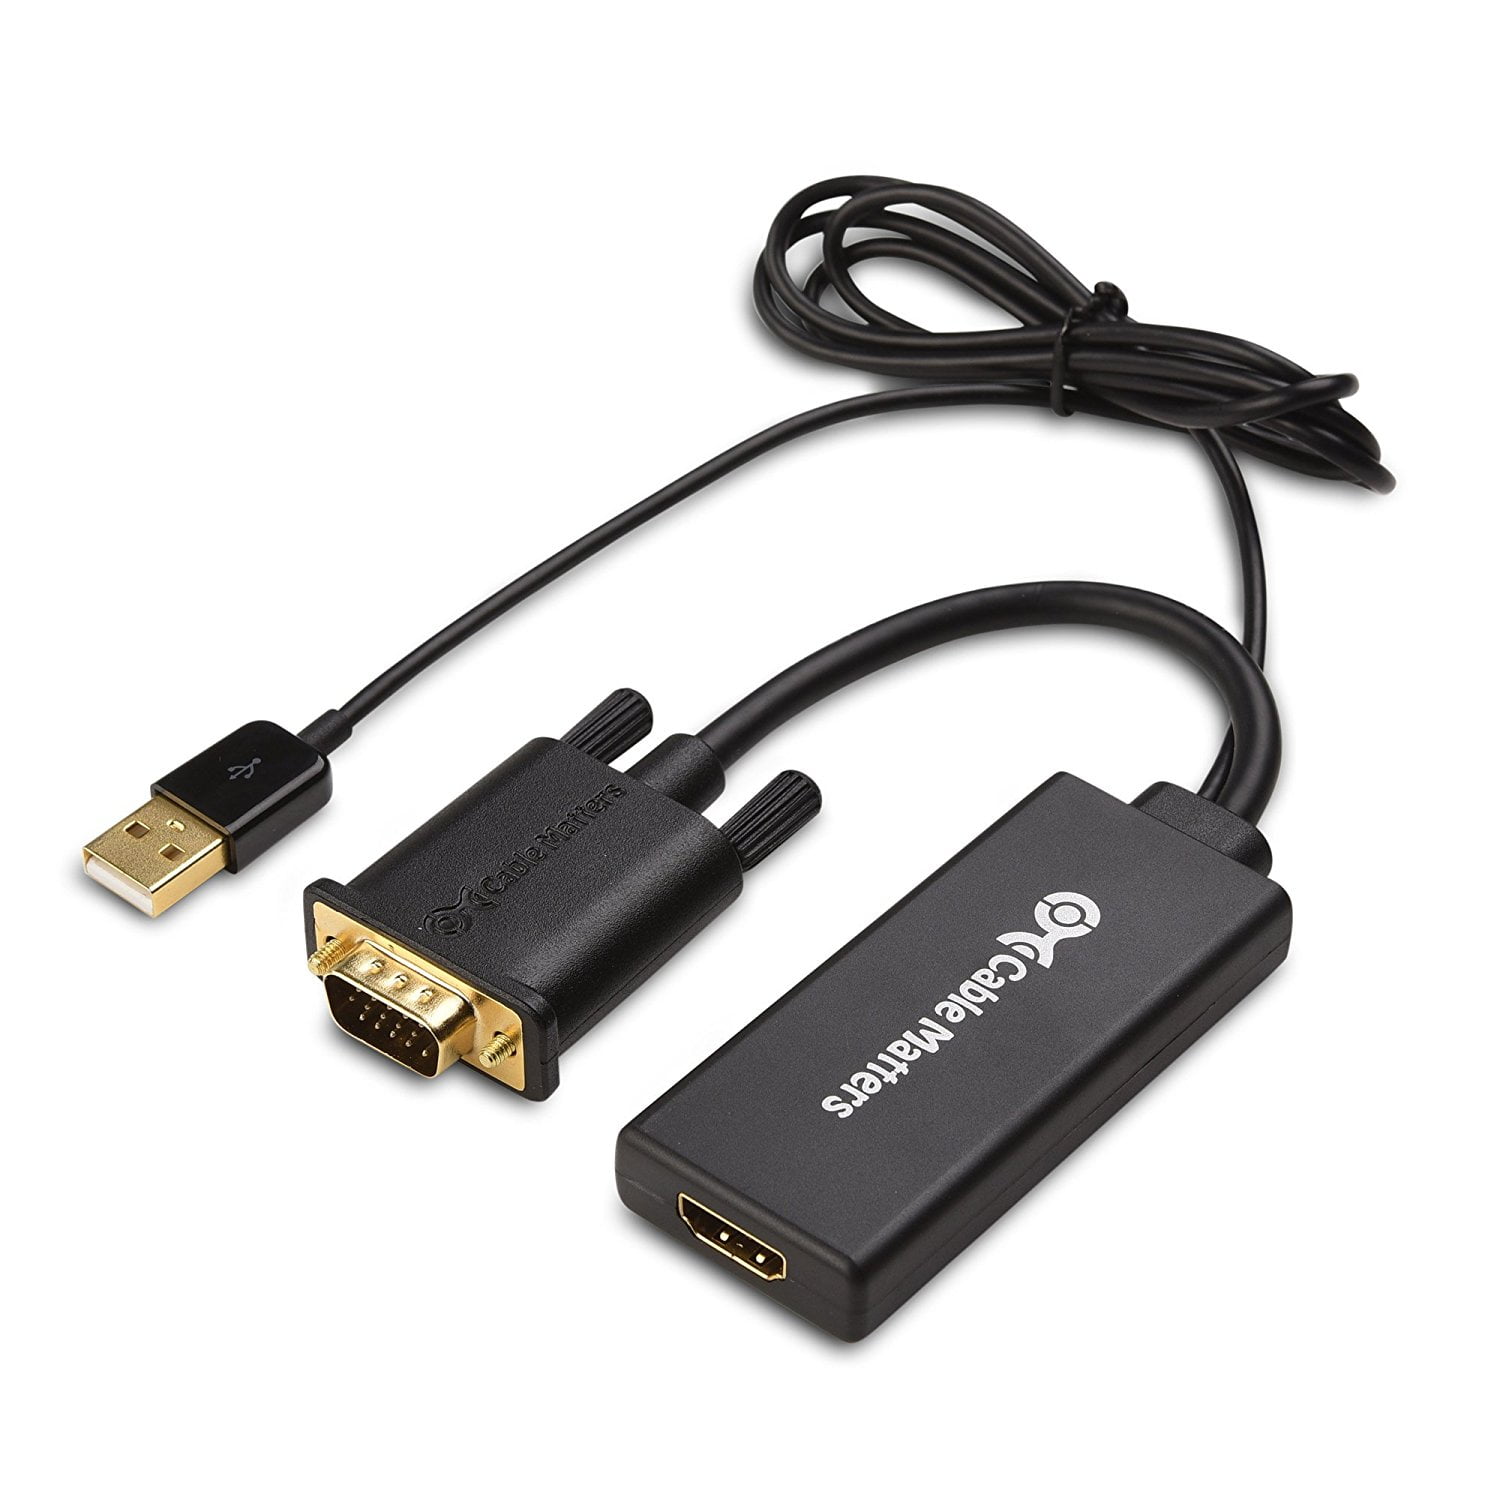 Cable Matters VGA to HDMI (VGA to HDMI Adapter) with Audio Support -